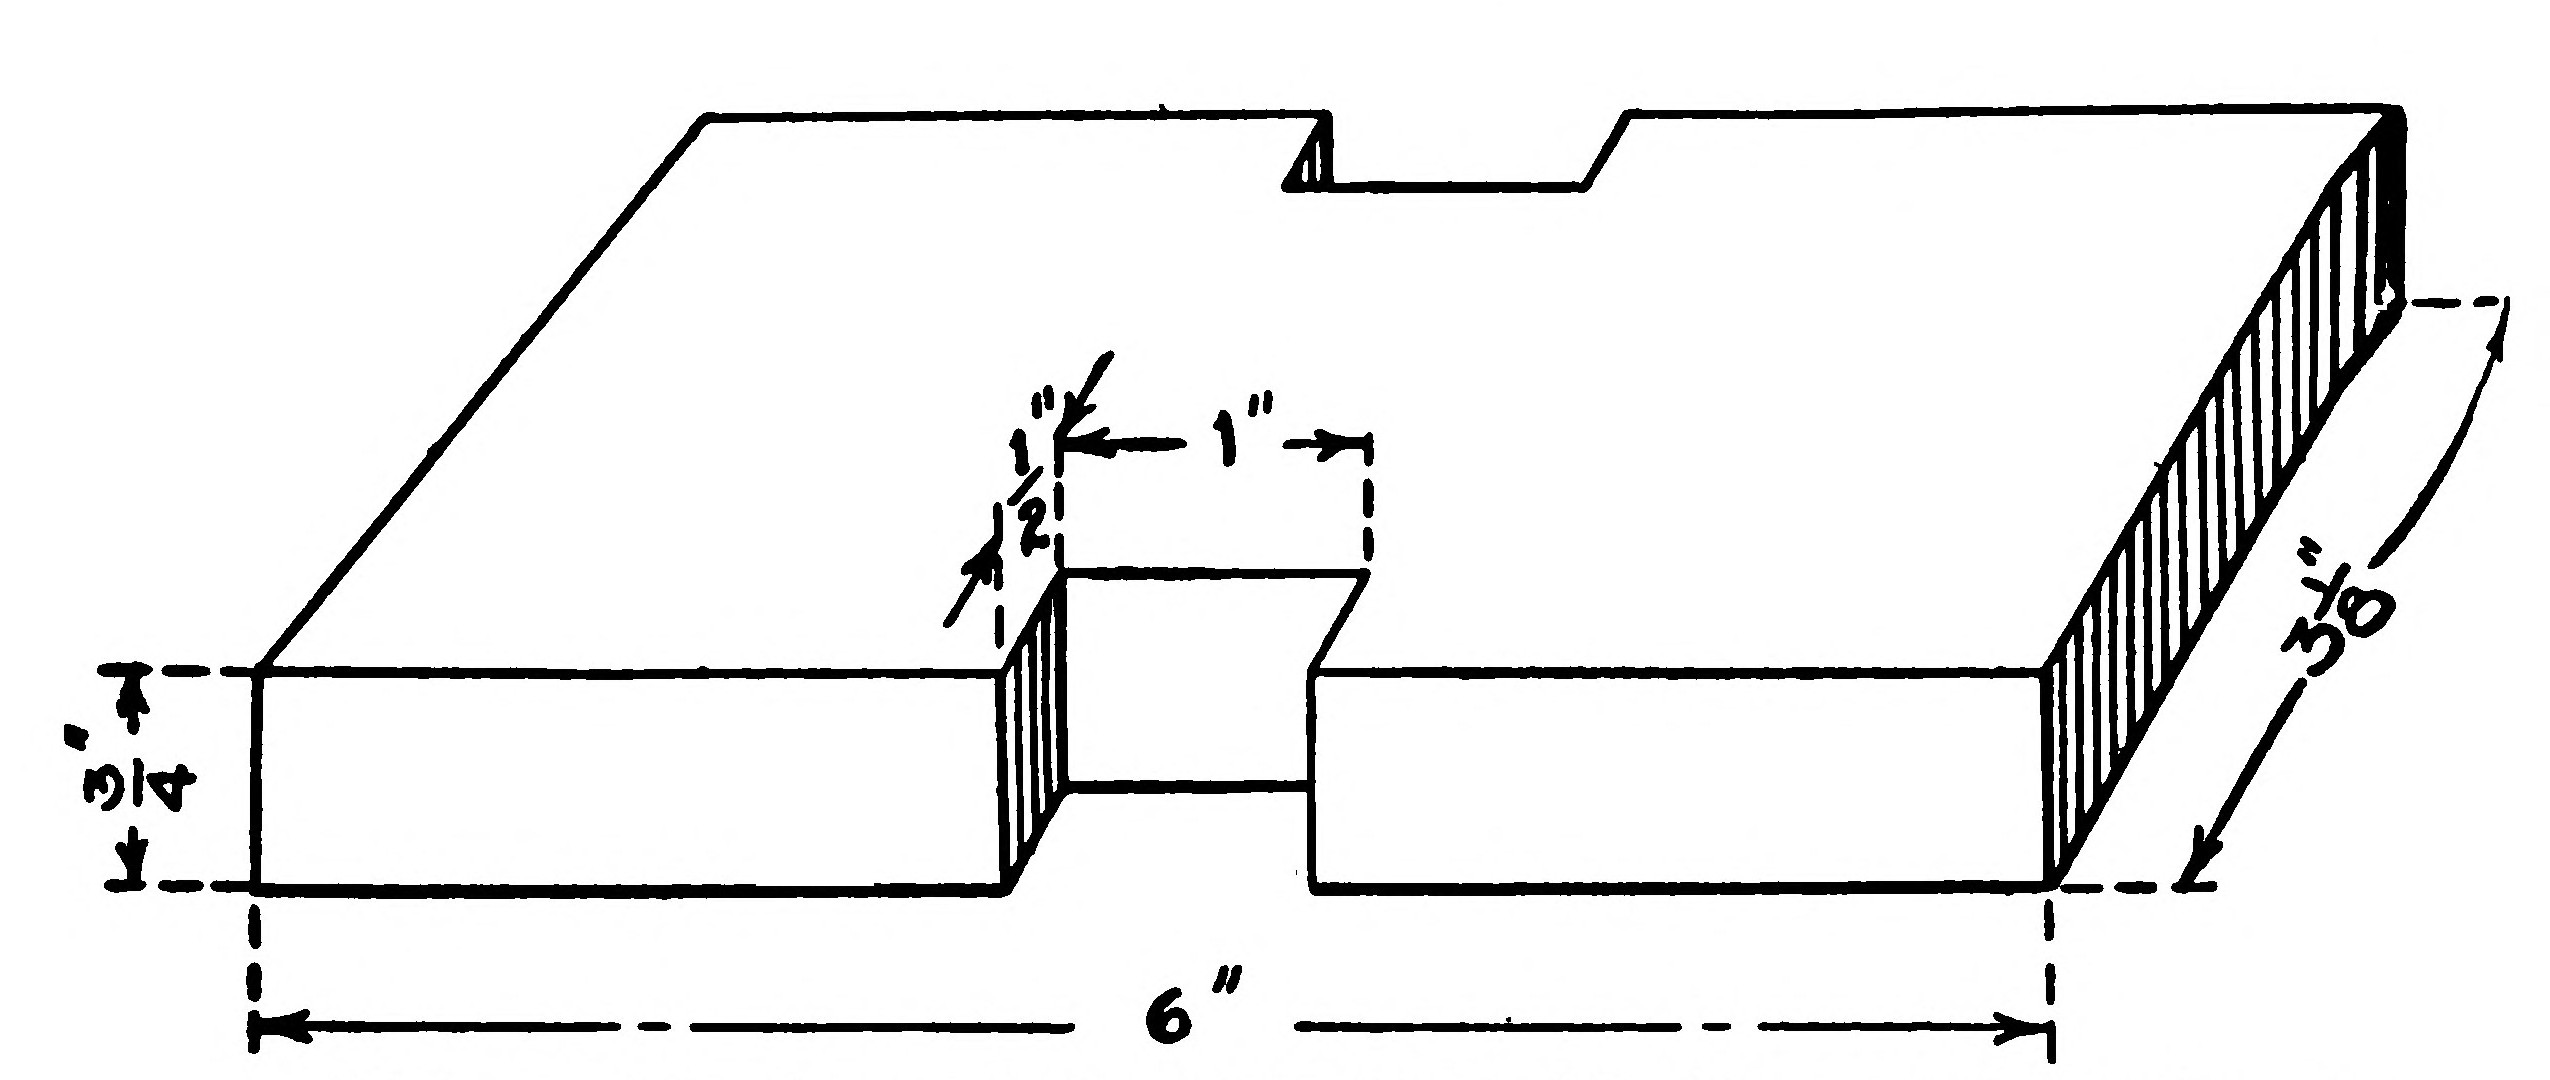 FIG. 5.—The base of the Wimshurst Machine.